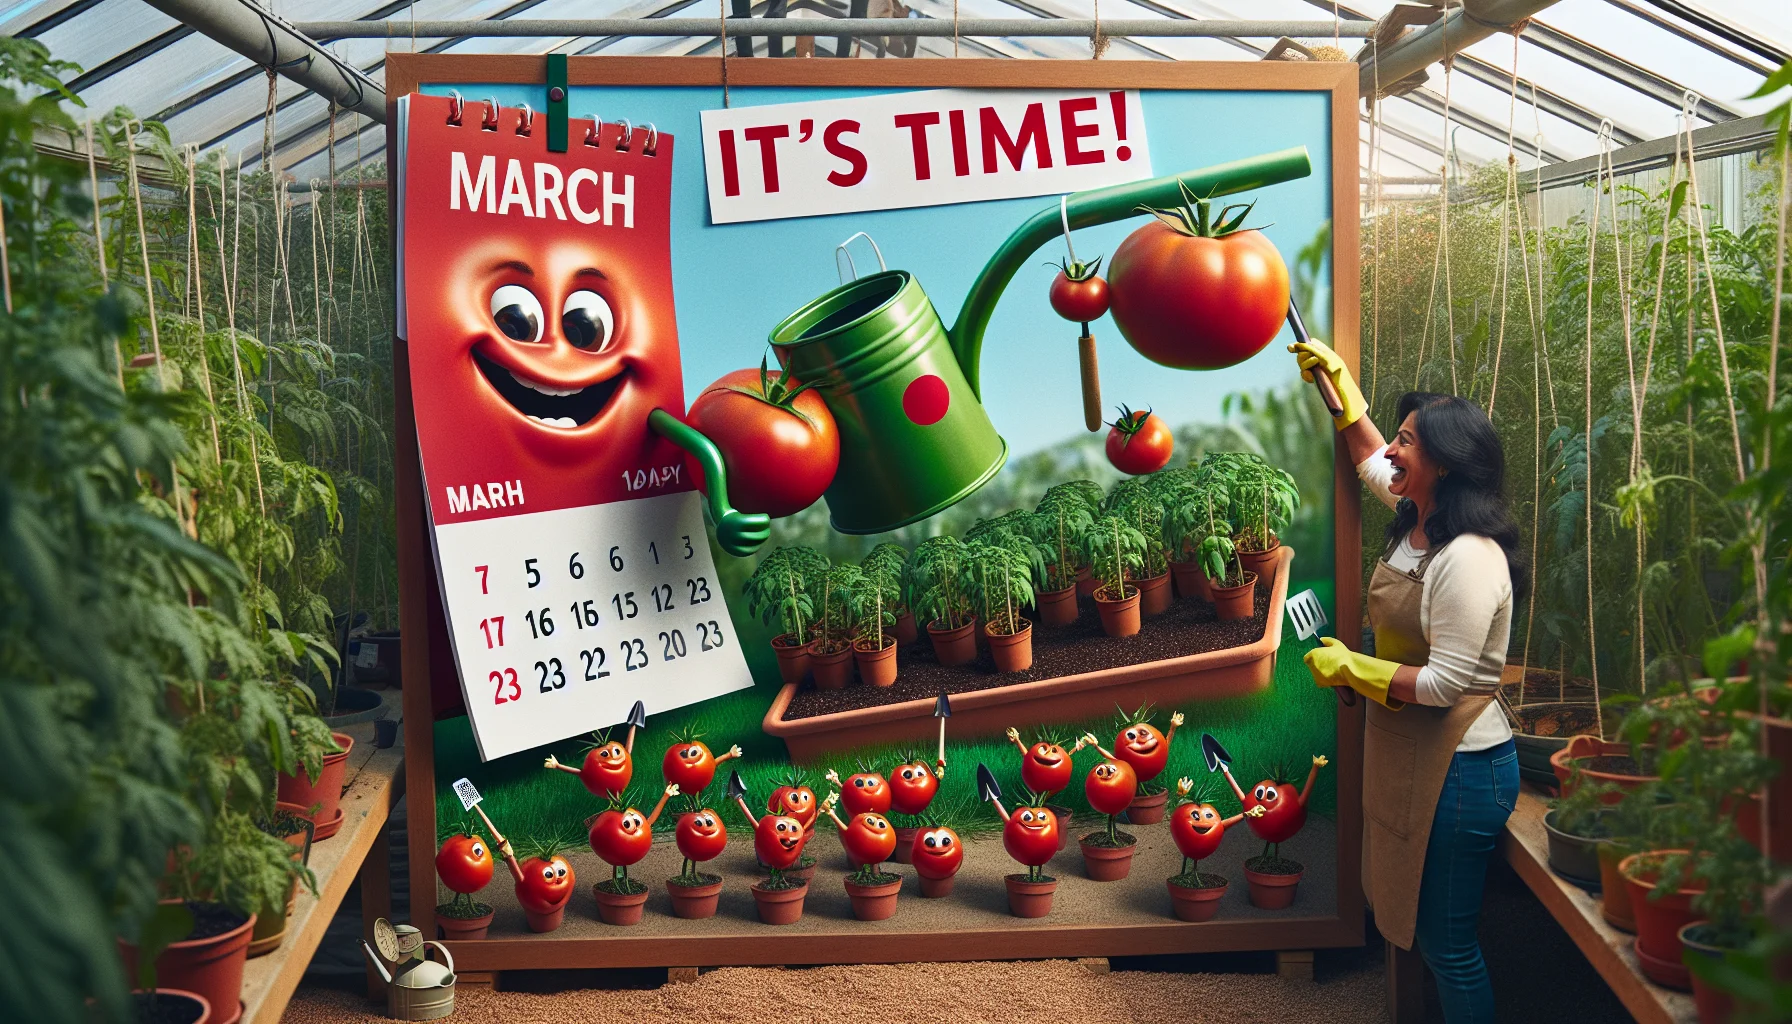 Imagine an amusing scene of an oversized calendar hanging in a lush greenhouse. The month displays March and the 15th is excessively circled with a sparkling red marker. Propped on the corner is a tiny army of tomato seedlings in pots, armed with miniature watering cans and trowels, preparing themselves for their upcoming planting mission. There's a joyful banner floating above them that says 'It's Time!'. A South Asian woman, with a sunny smile and gardening gloves, watches this amusing scene, encouraging viewers to find joy in gardening.